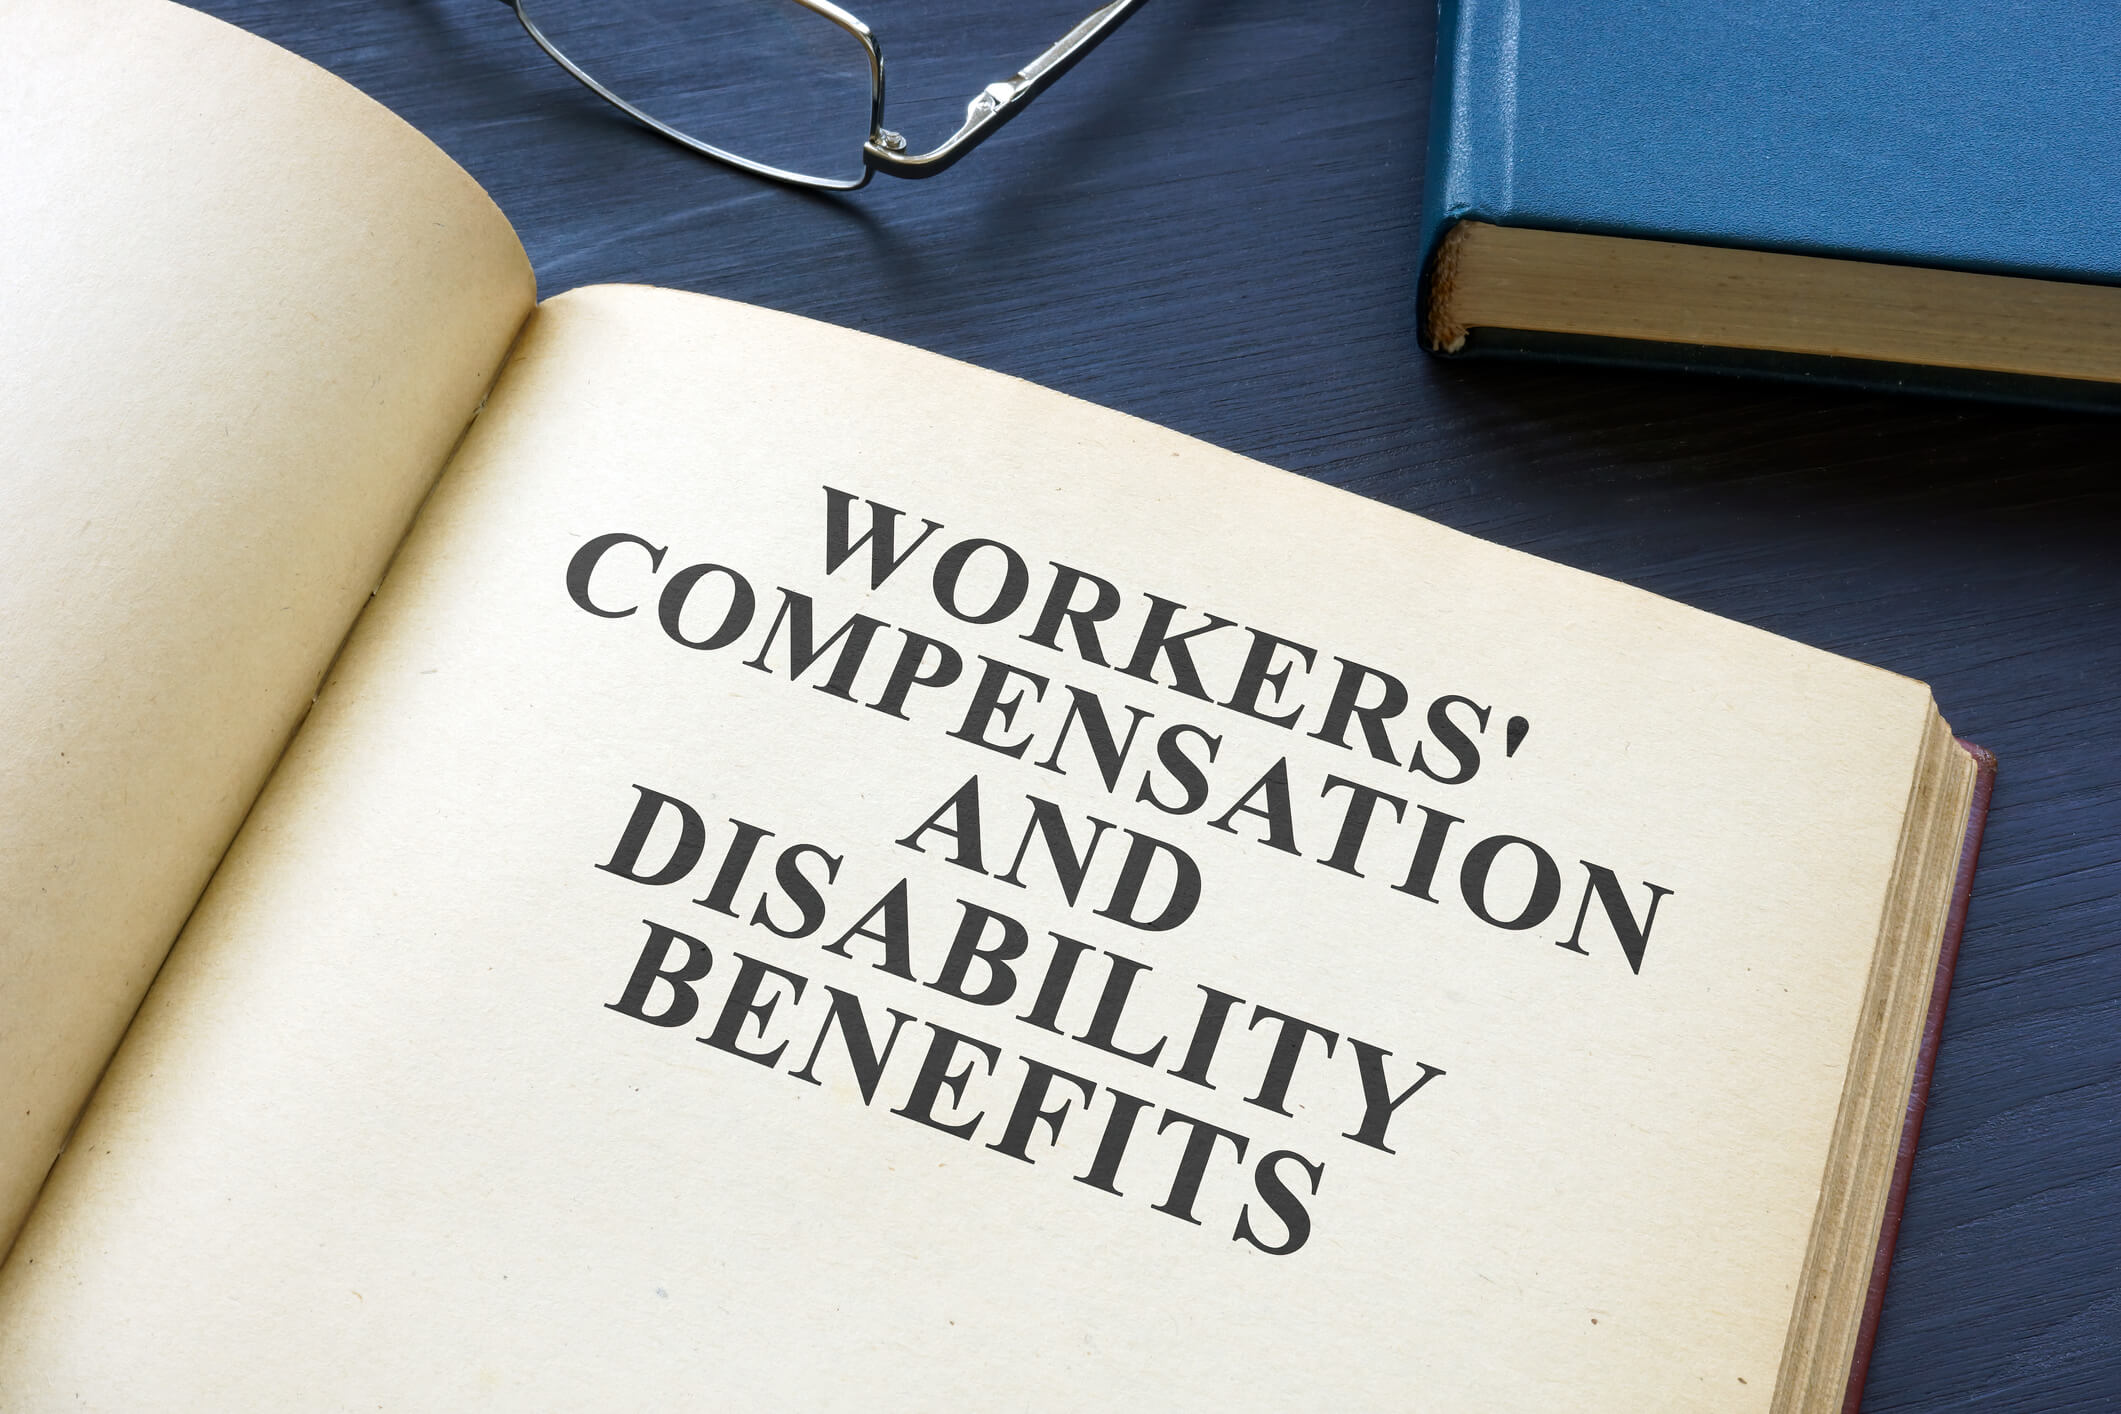 Workers Compensation and Disability Benefits